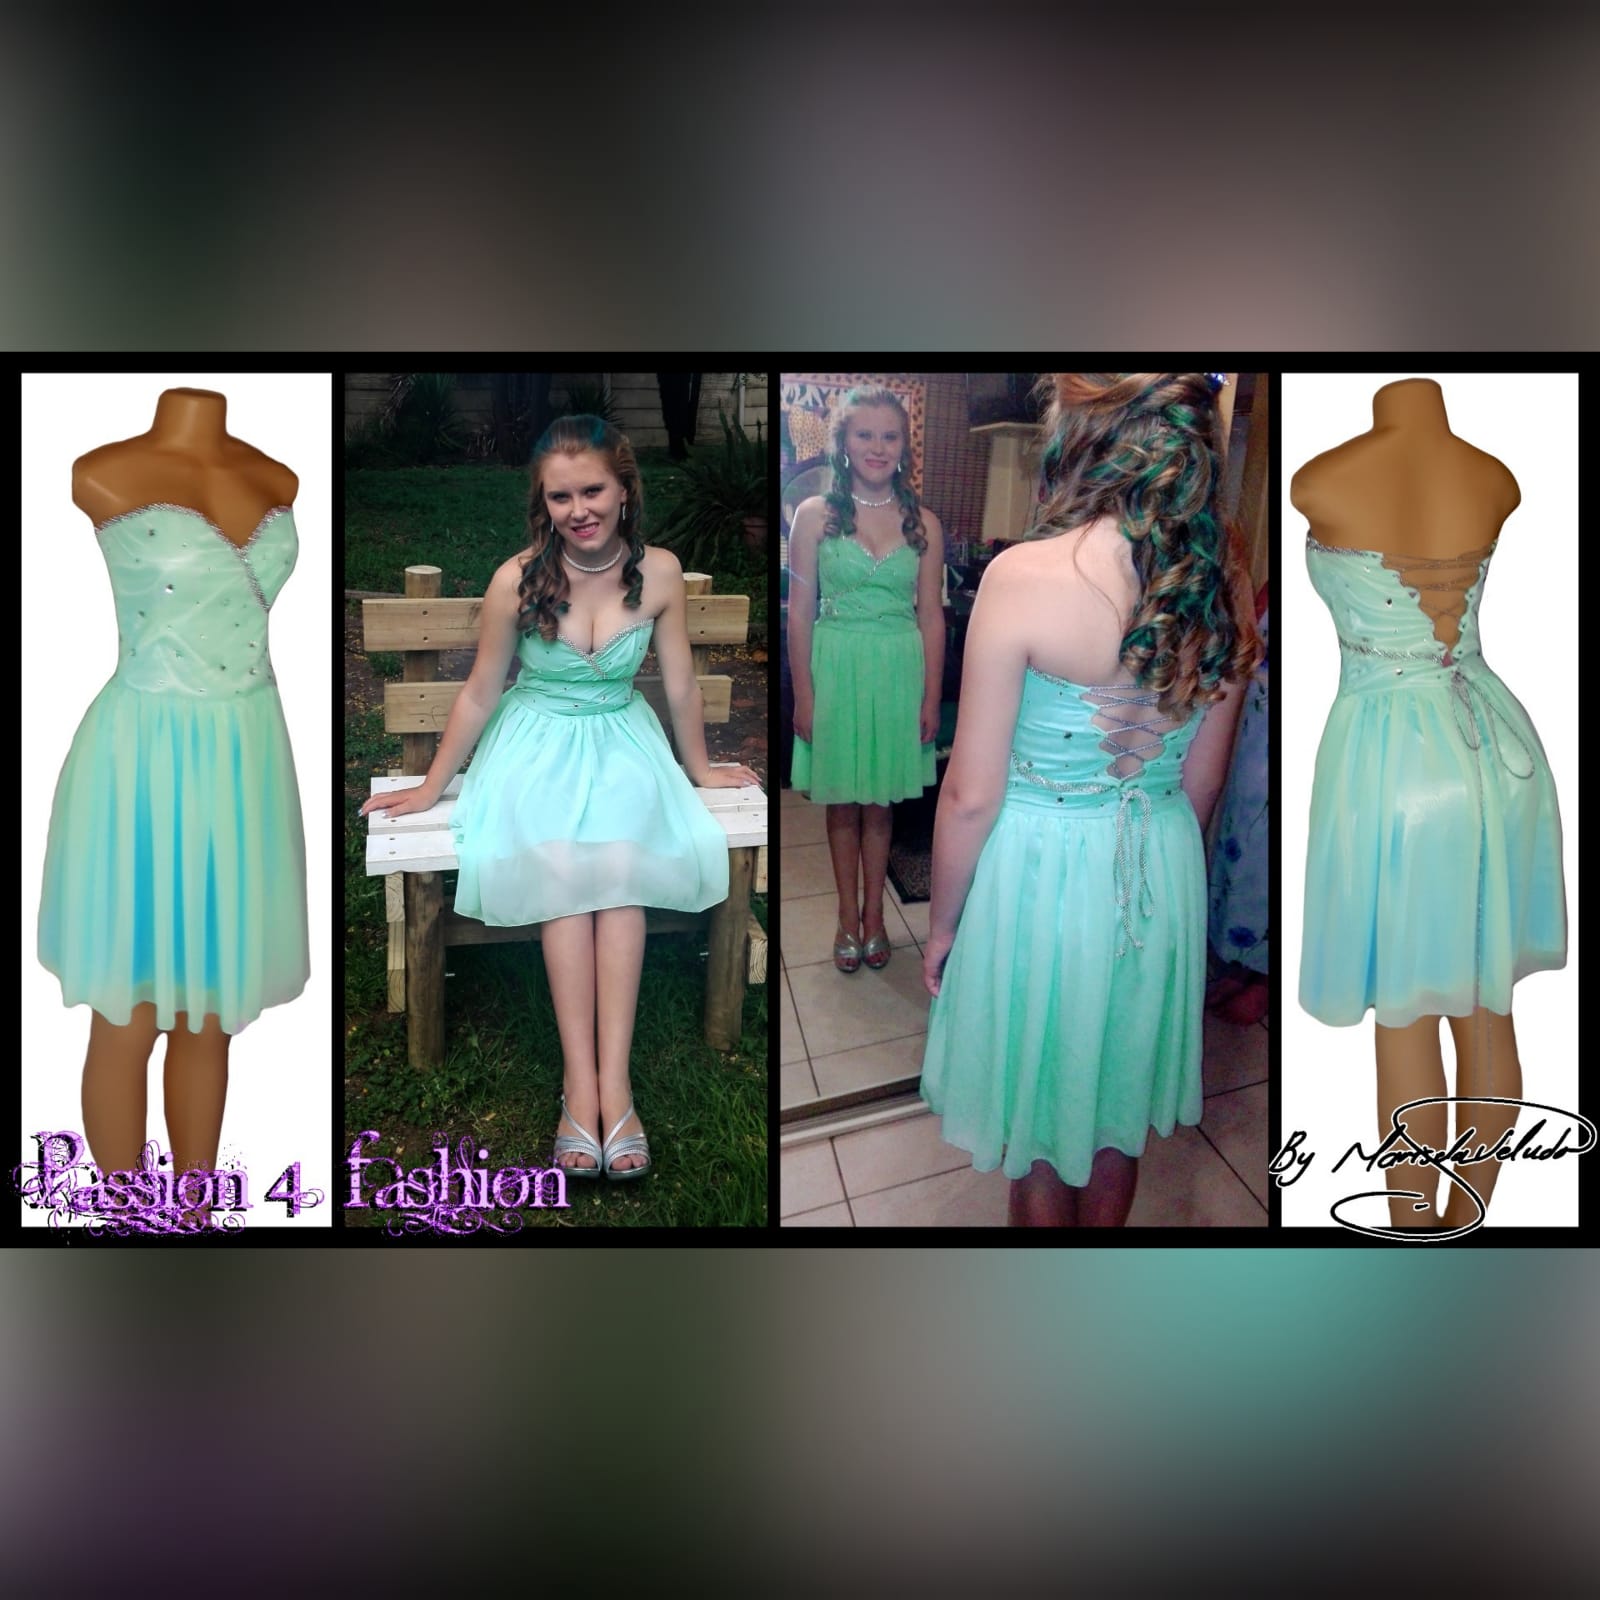 Mint green short matric dress with beaded bodice 6 mint green short matric dress with beaded bodice, boob tube sweetheart neckline and a lace-up open back.